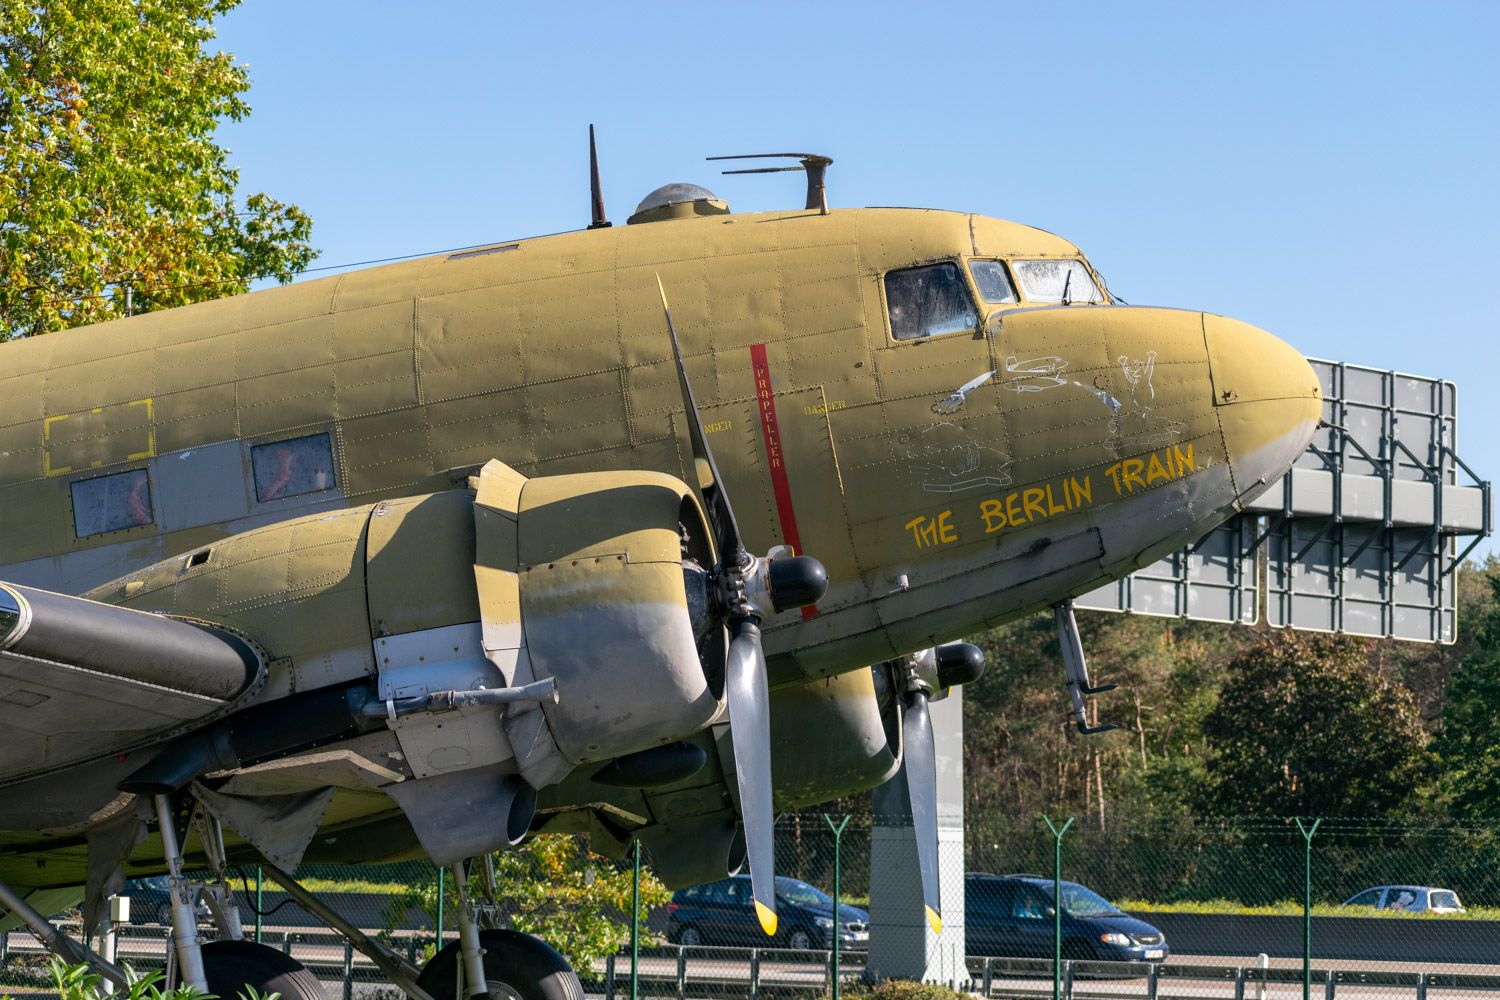 An old aircraft used in the Berlin Airlift on display.